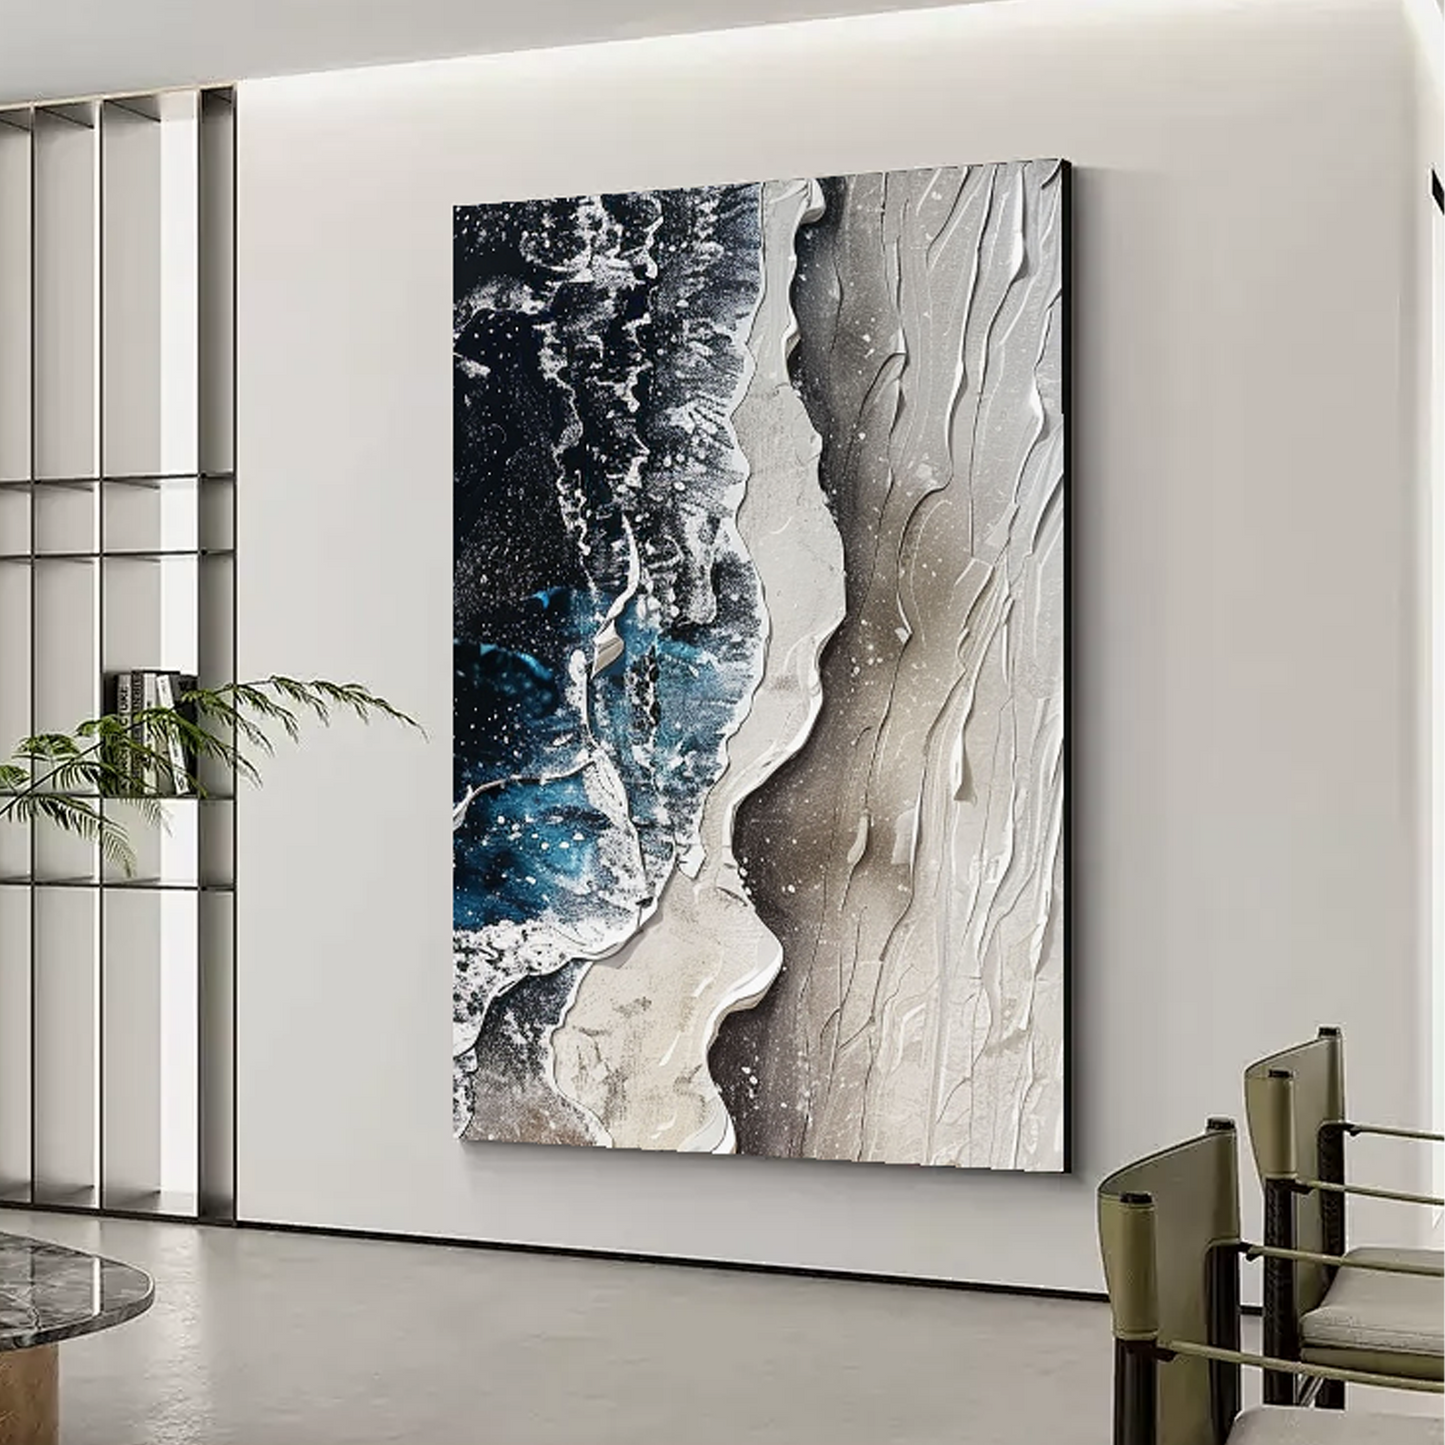 3D Textured Abstract Painting "Moonlit Shores"